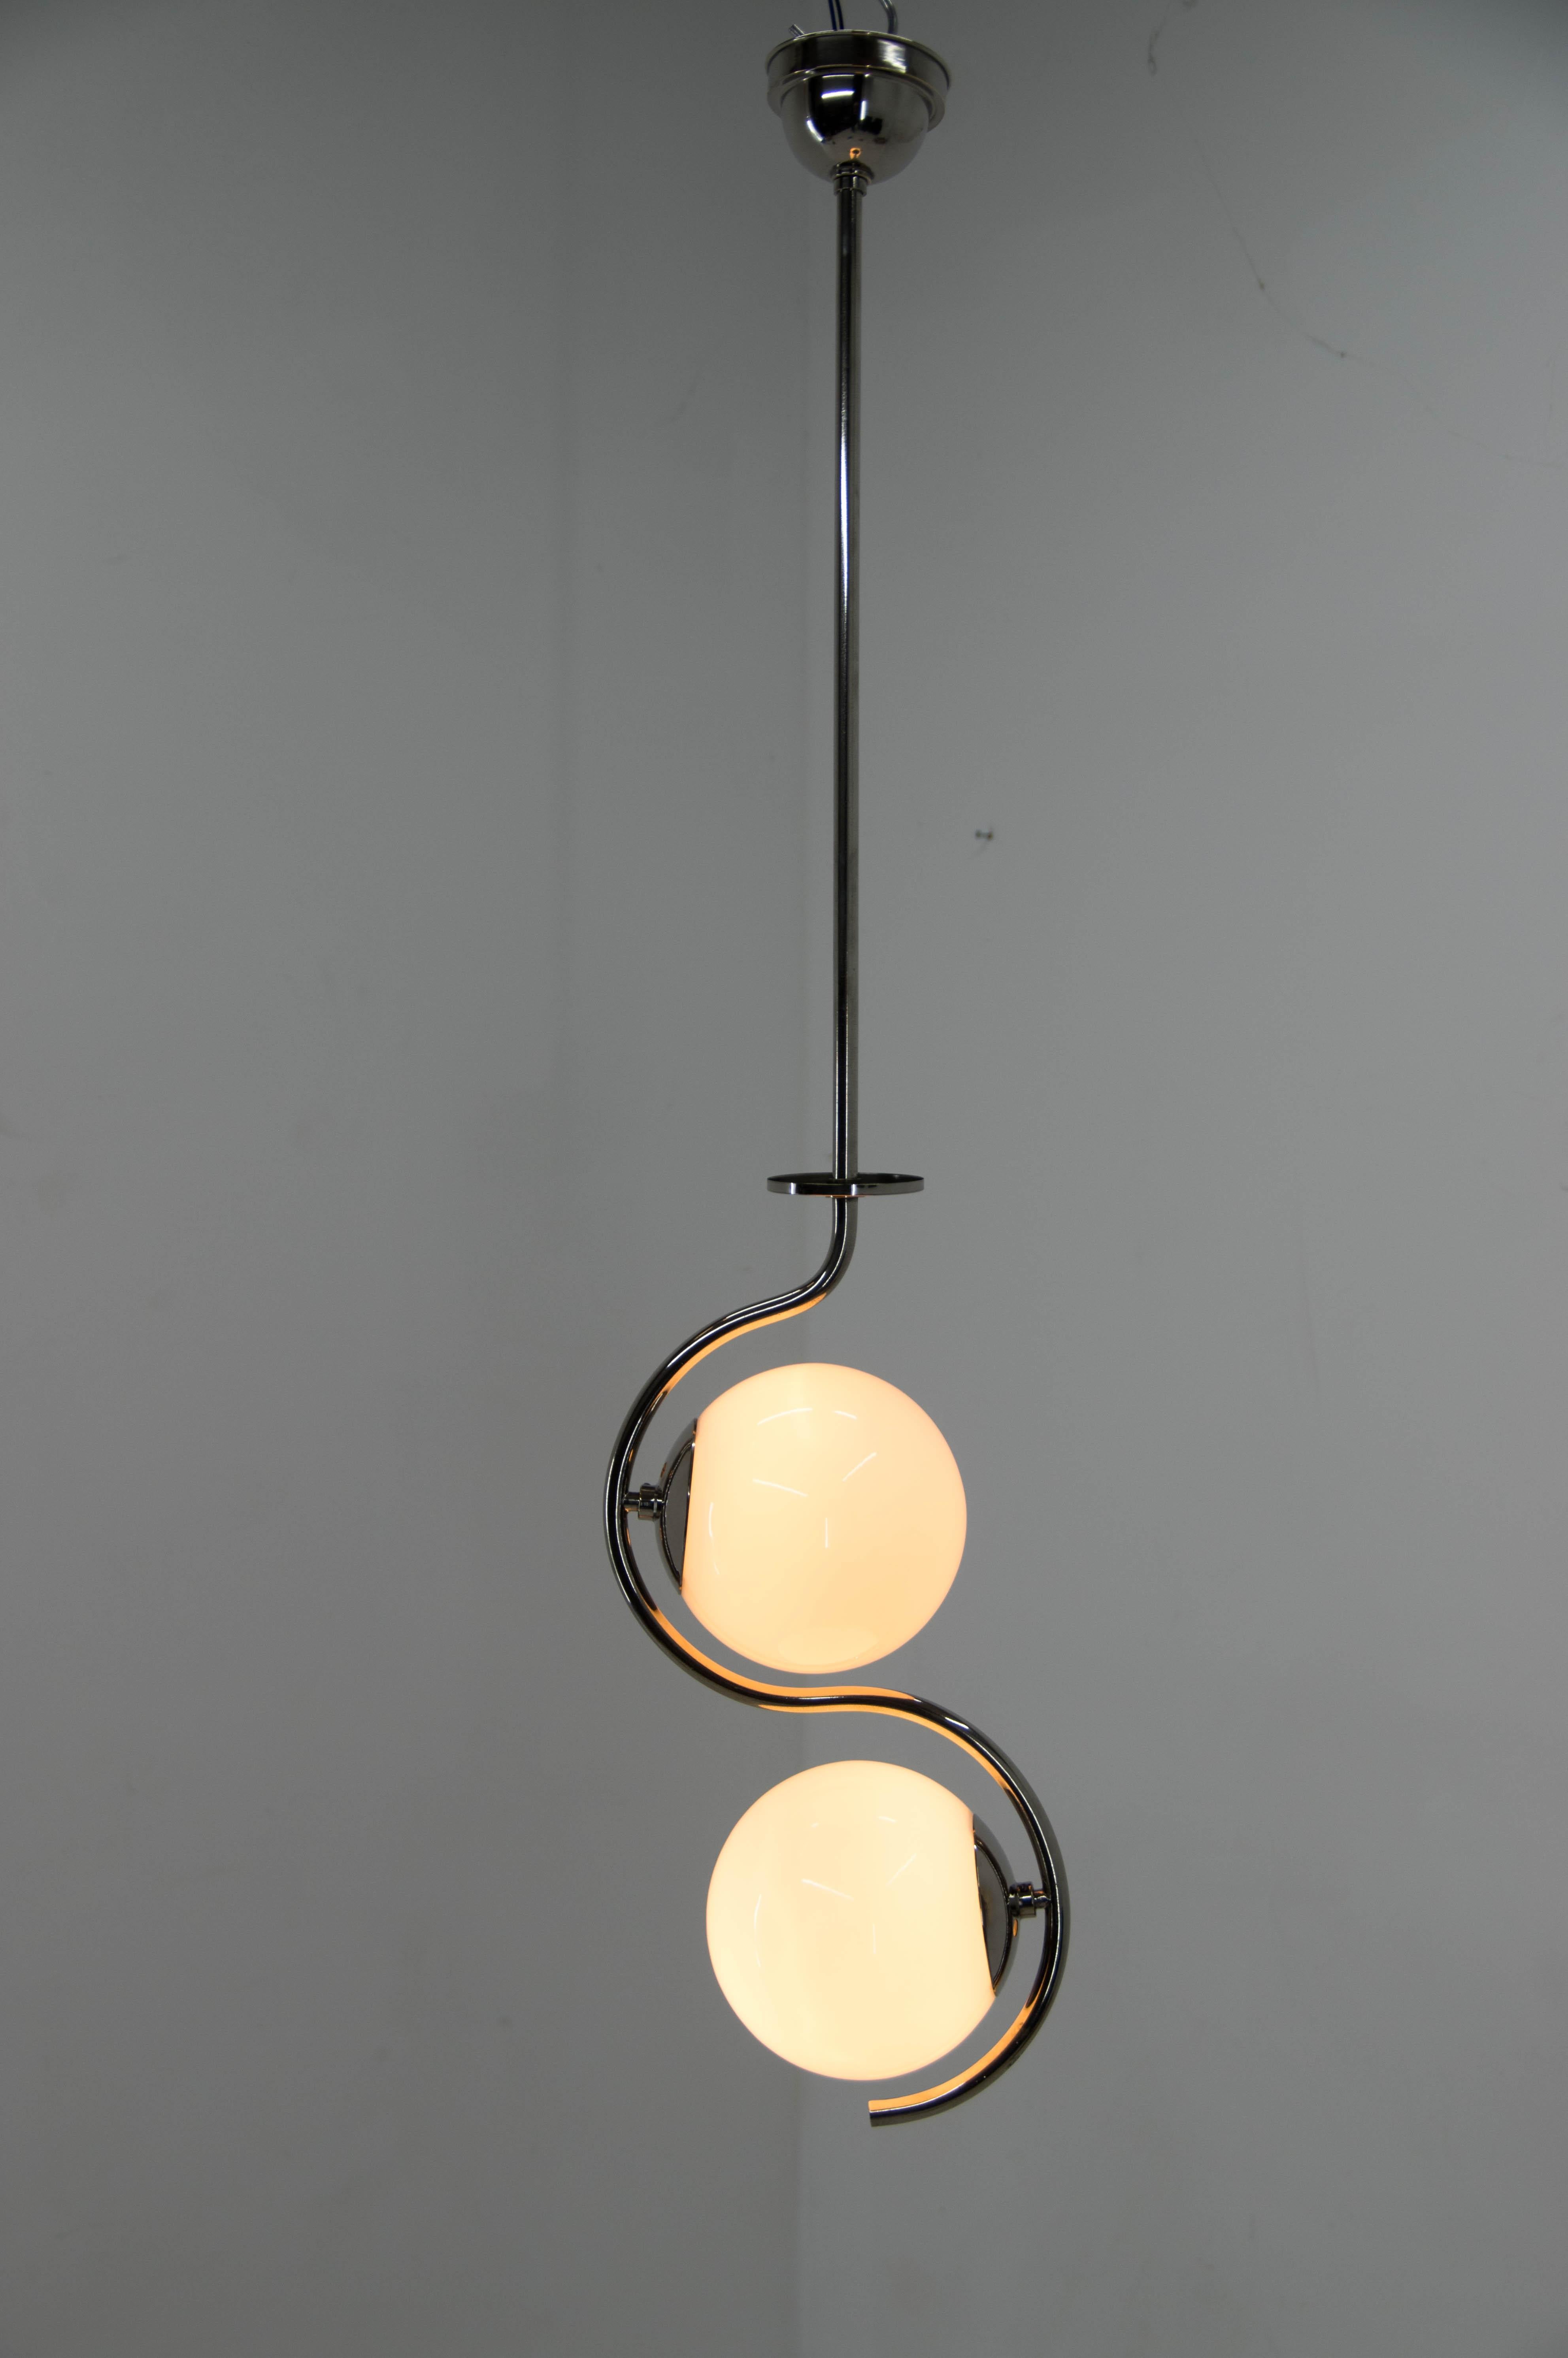 Very elegant and minimalistic pendant designed by Jindrich Halabala.
Very good condition, chrome polished, rewired: 2x60W, E25-E27 bulbs.
Height could be shortened on request.
US wiring compatible.